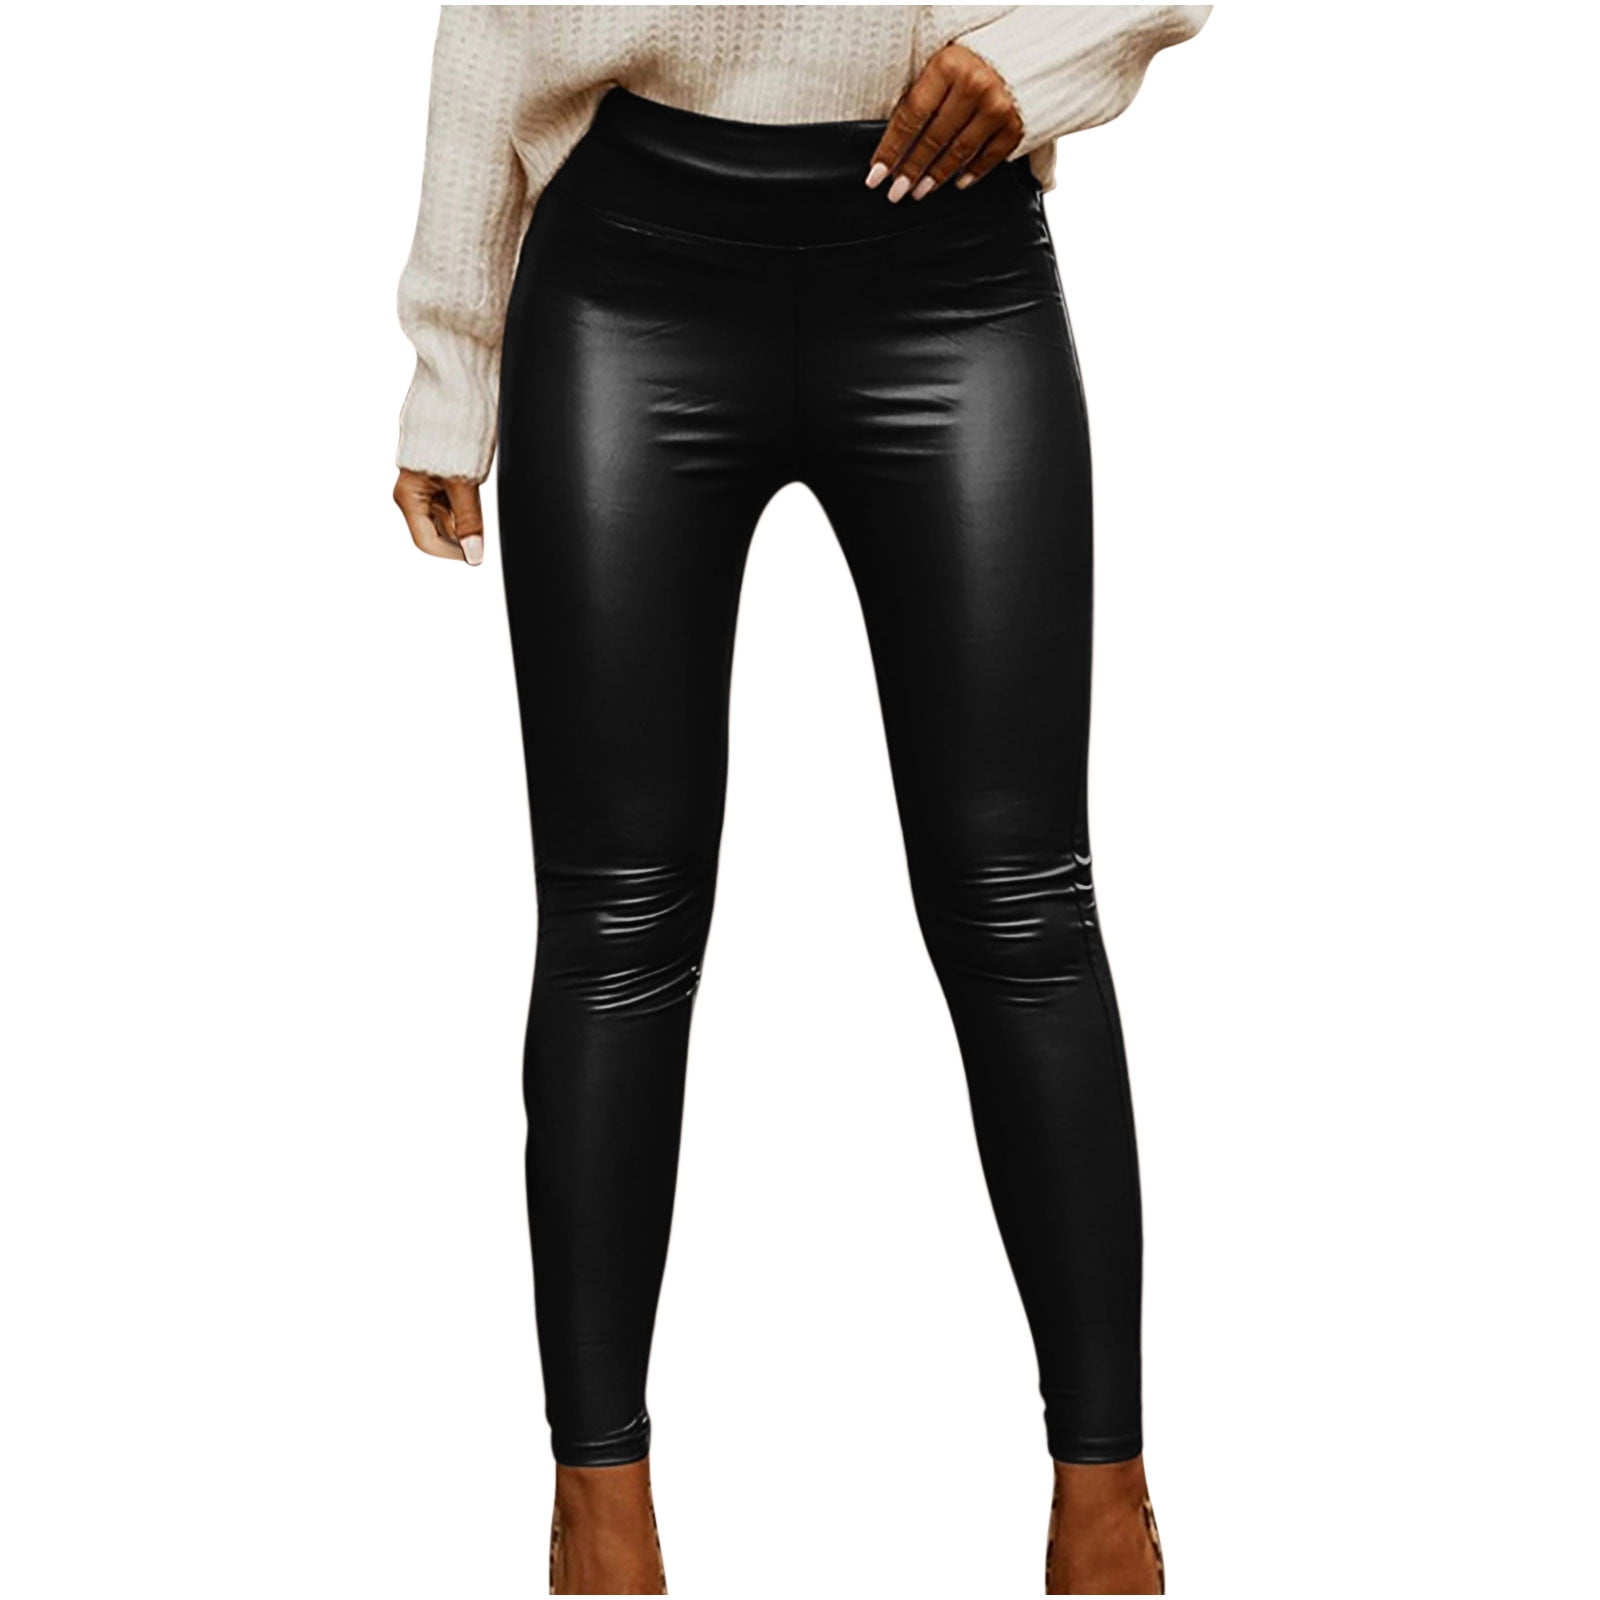 HAPIMO Savings Hip Wrapped Leather Pants for Women Solid Color Womens  Skinny Leggings Trousers Casual Comfy Pants Teens Fall Fashion Outfits  Elastic